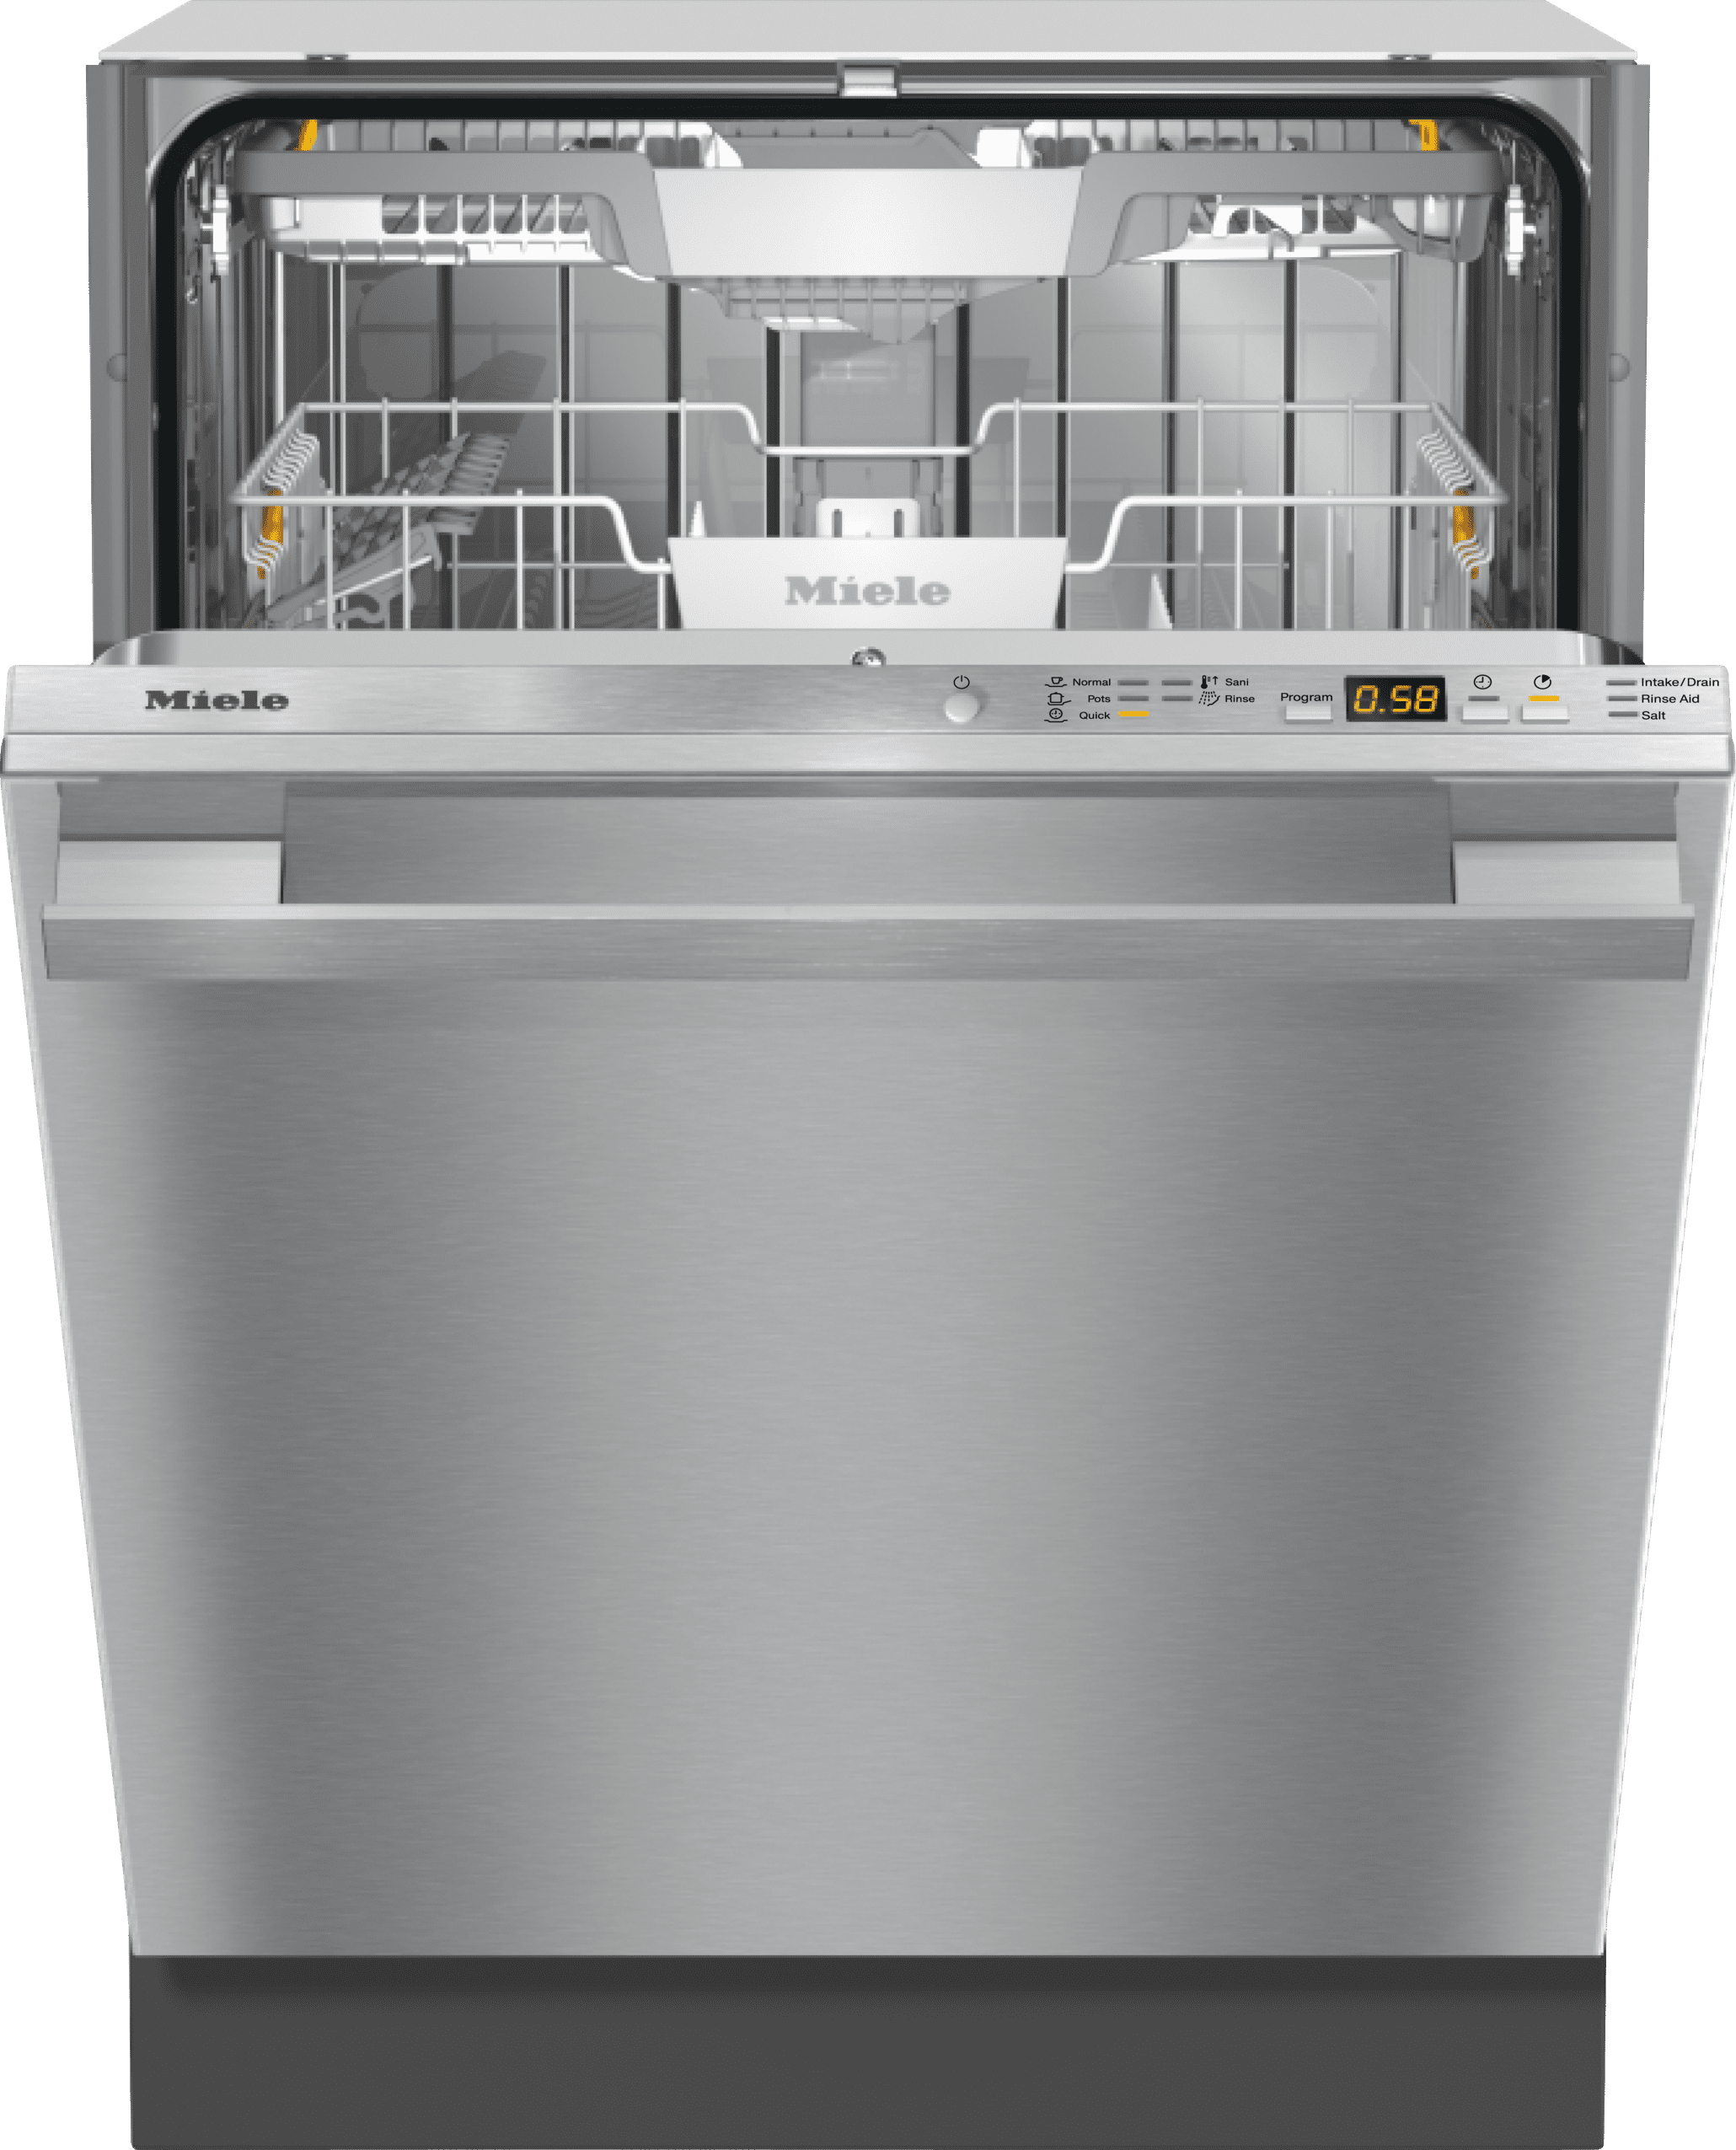 Miele G5266SCVISF STAINLESS STEEL G 5266 Scvi Sf - Fully Integrated Dishwasher Xxl For Optimum Drying Results Thanks To Autoopen Drying.